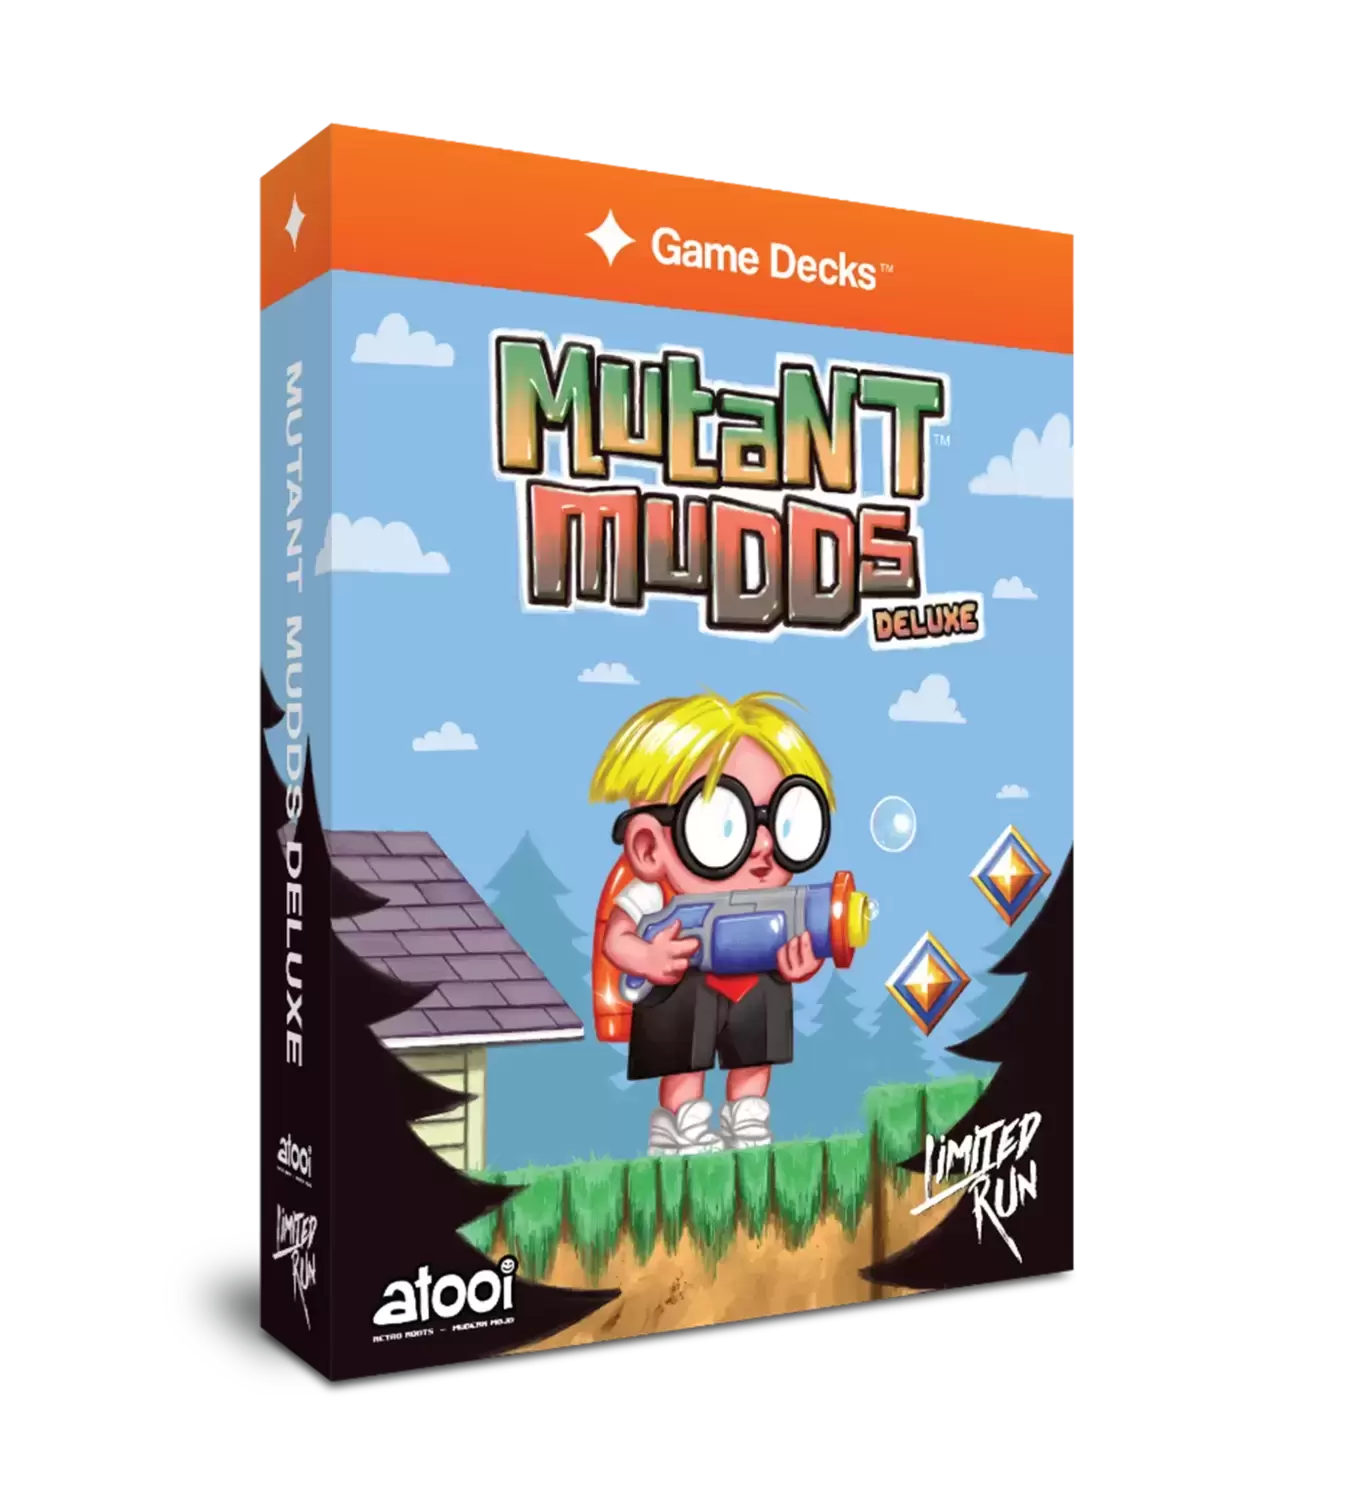 Autres jeux - GameDecks - Mutant Mudds Deluxe Blue Edition - Limited Run